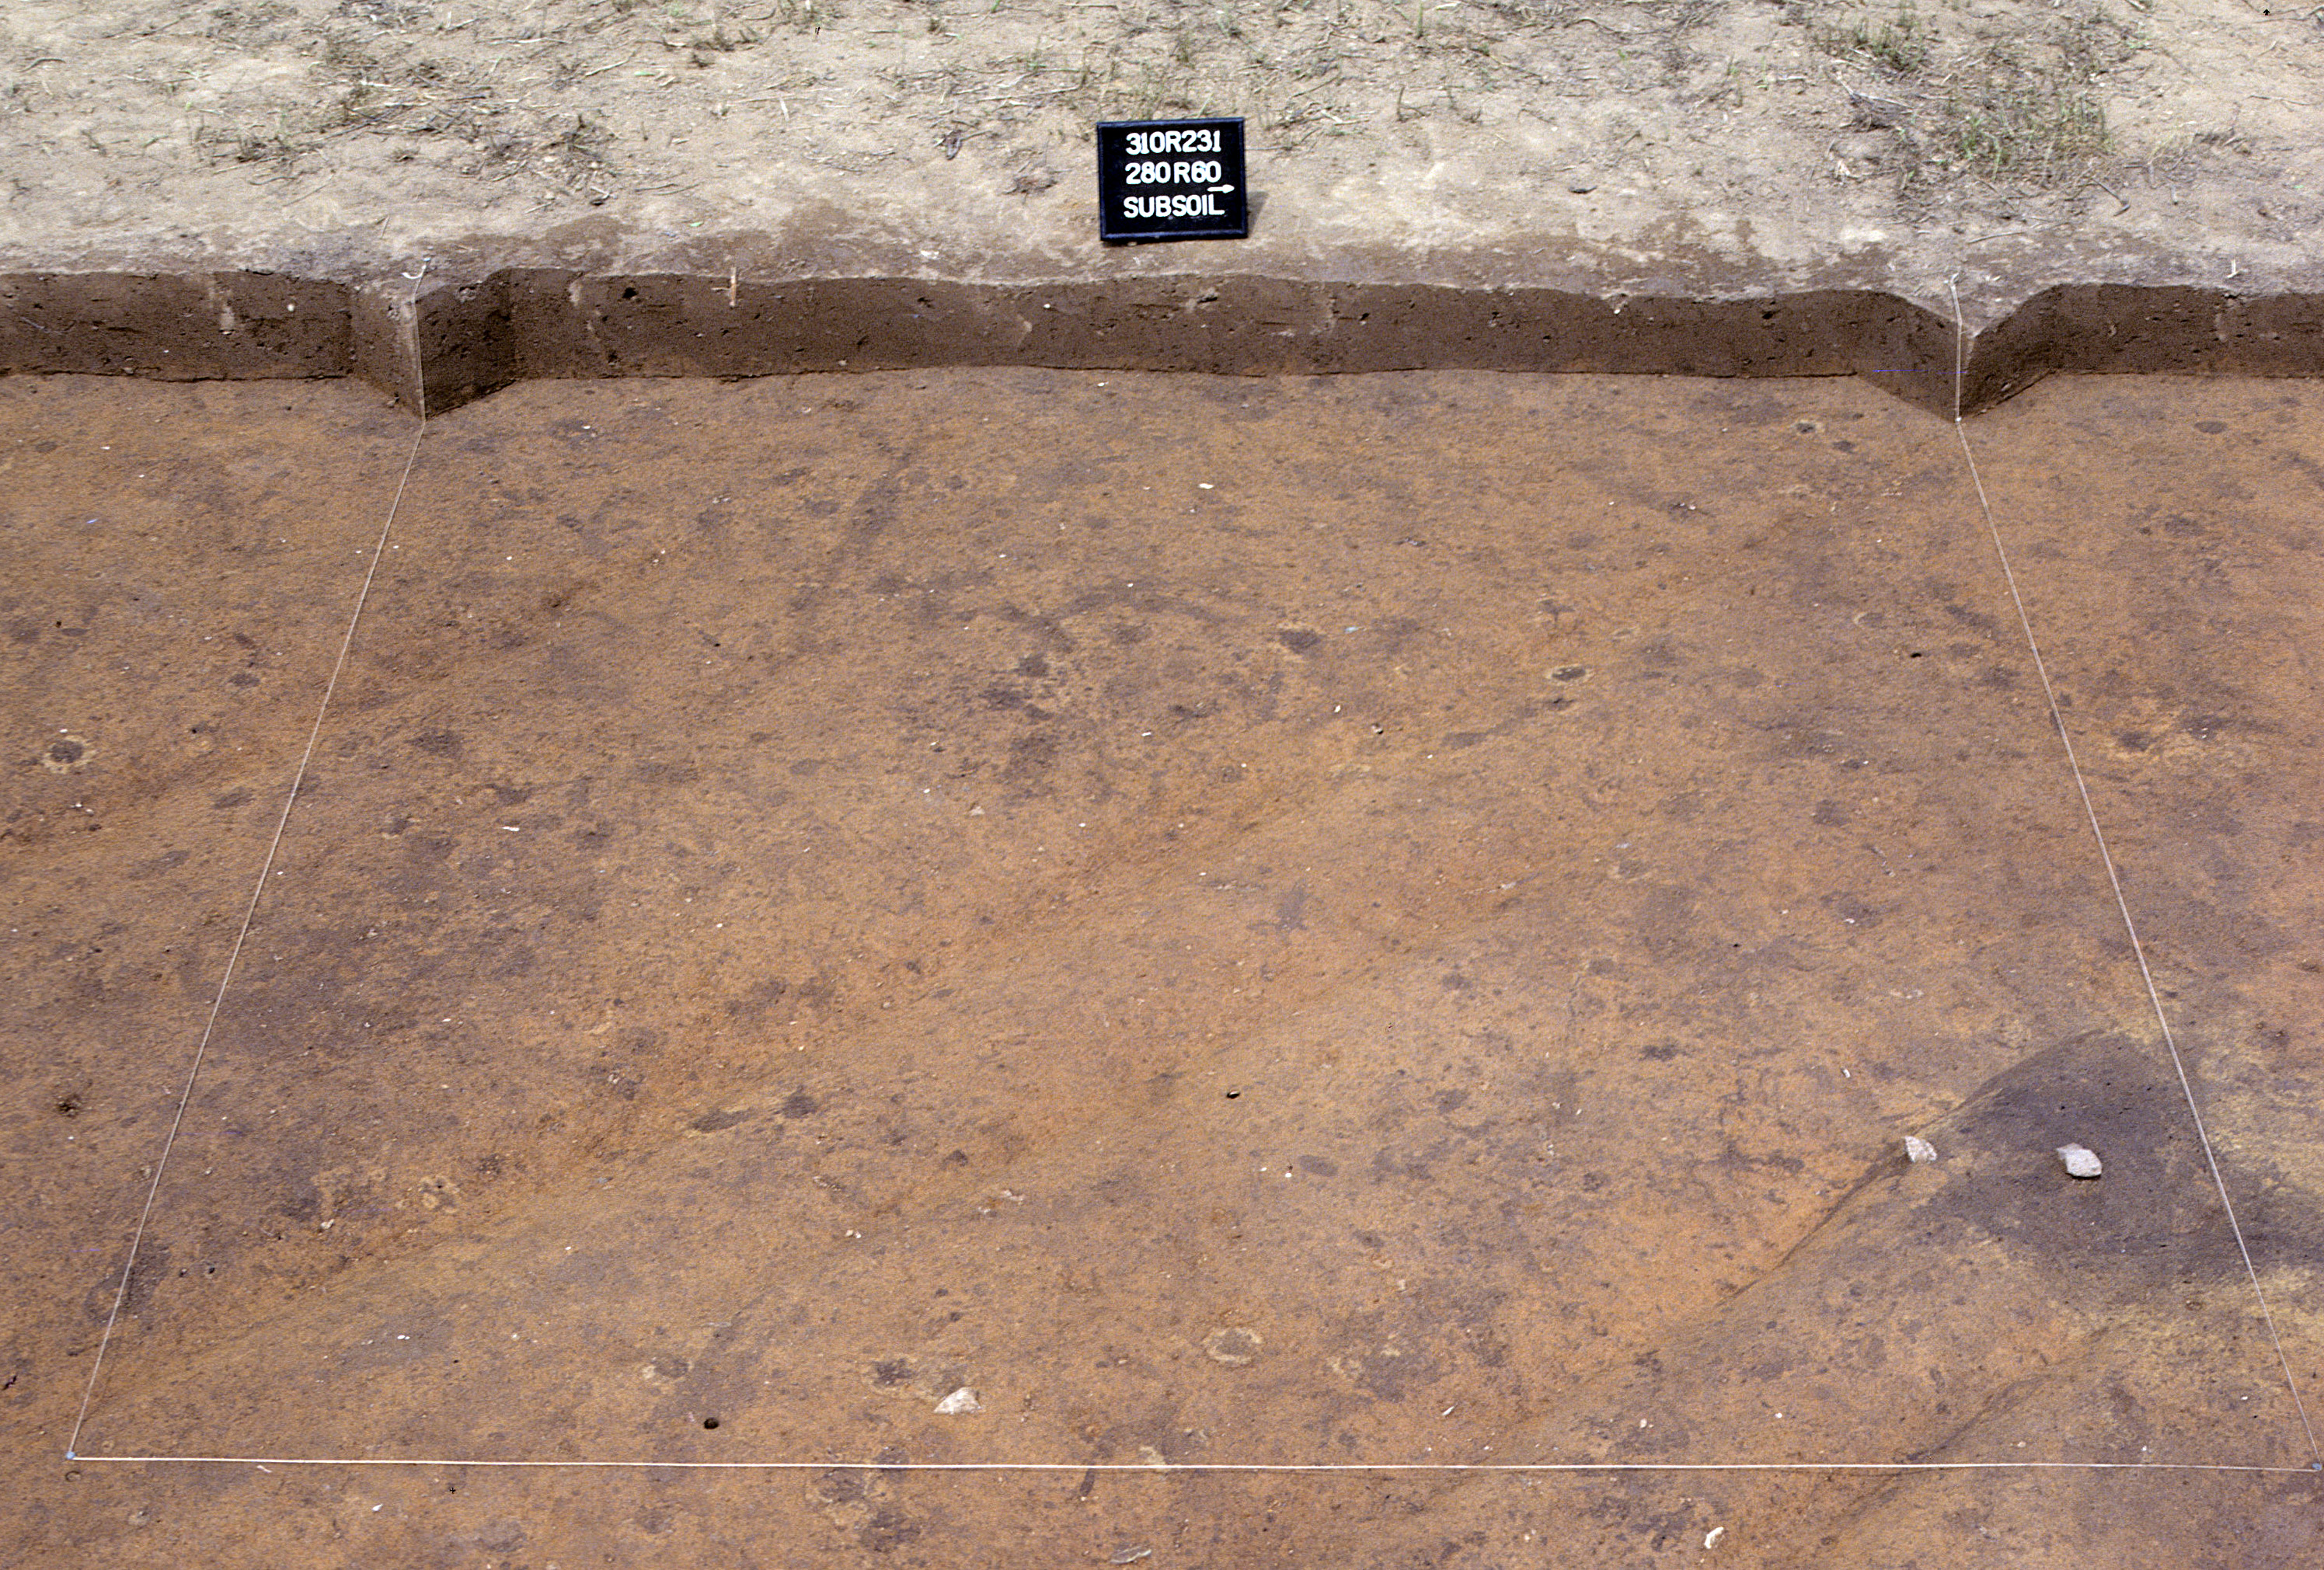 Figure 960. Sq. 280R60 at top of subsoil (view to west).